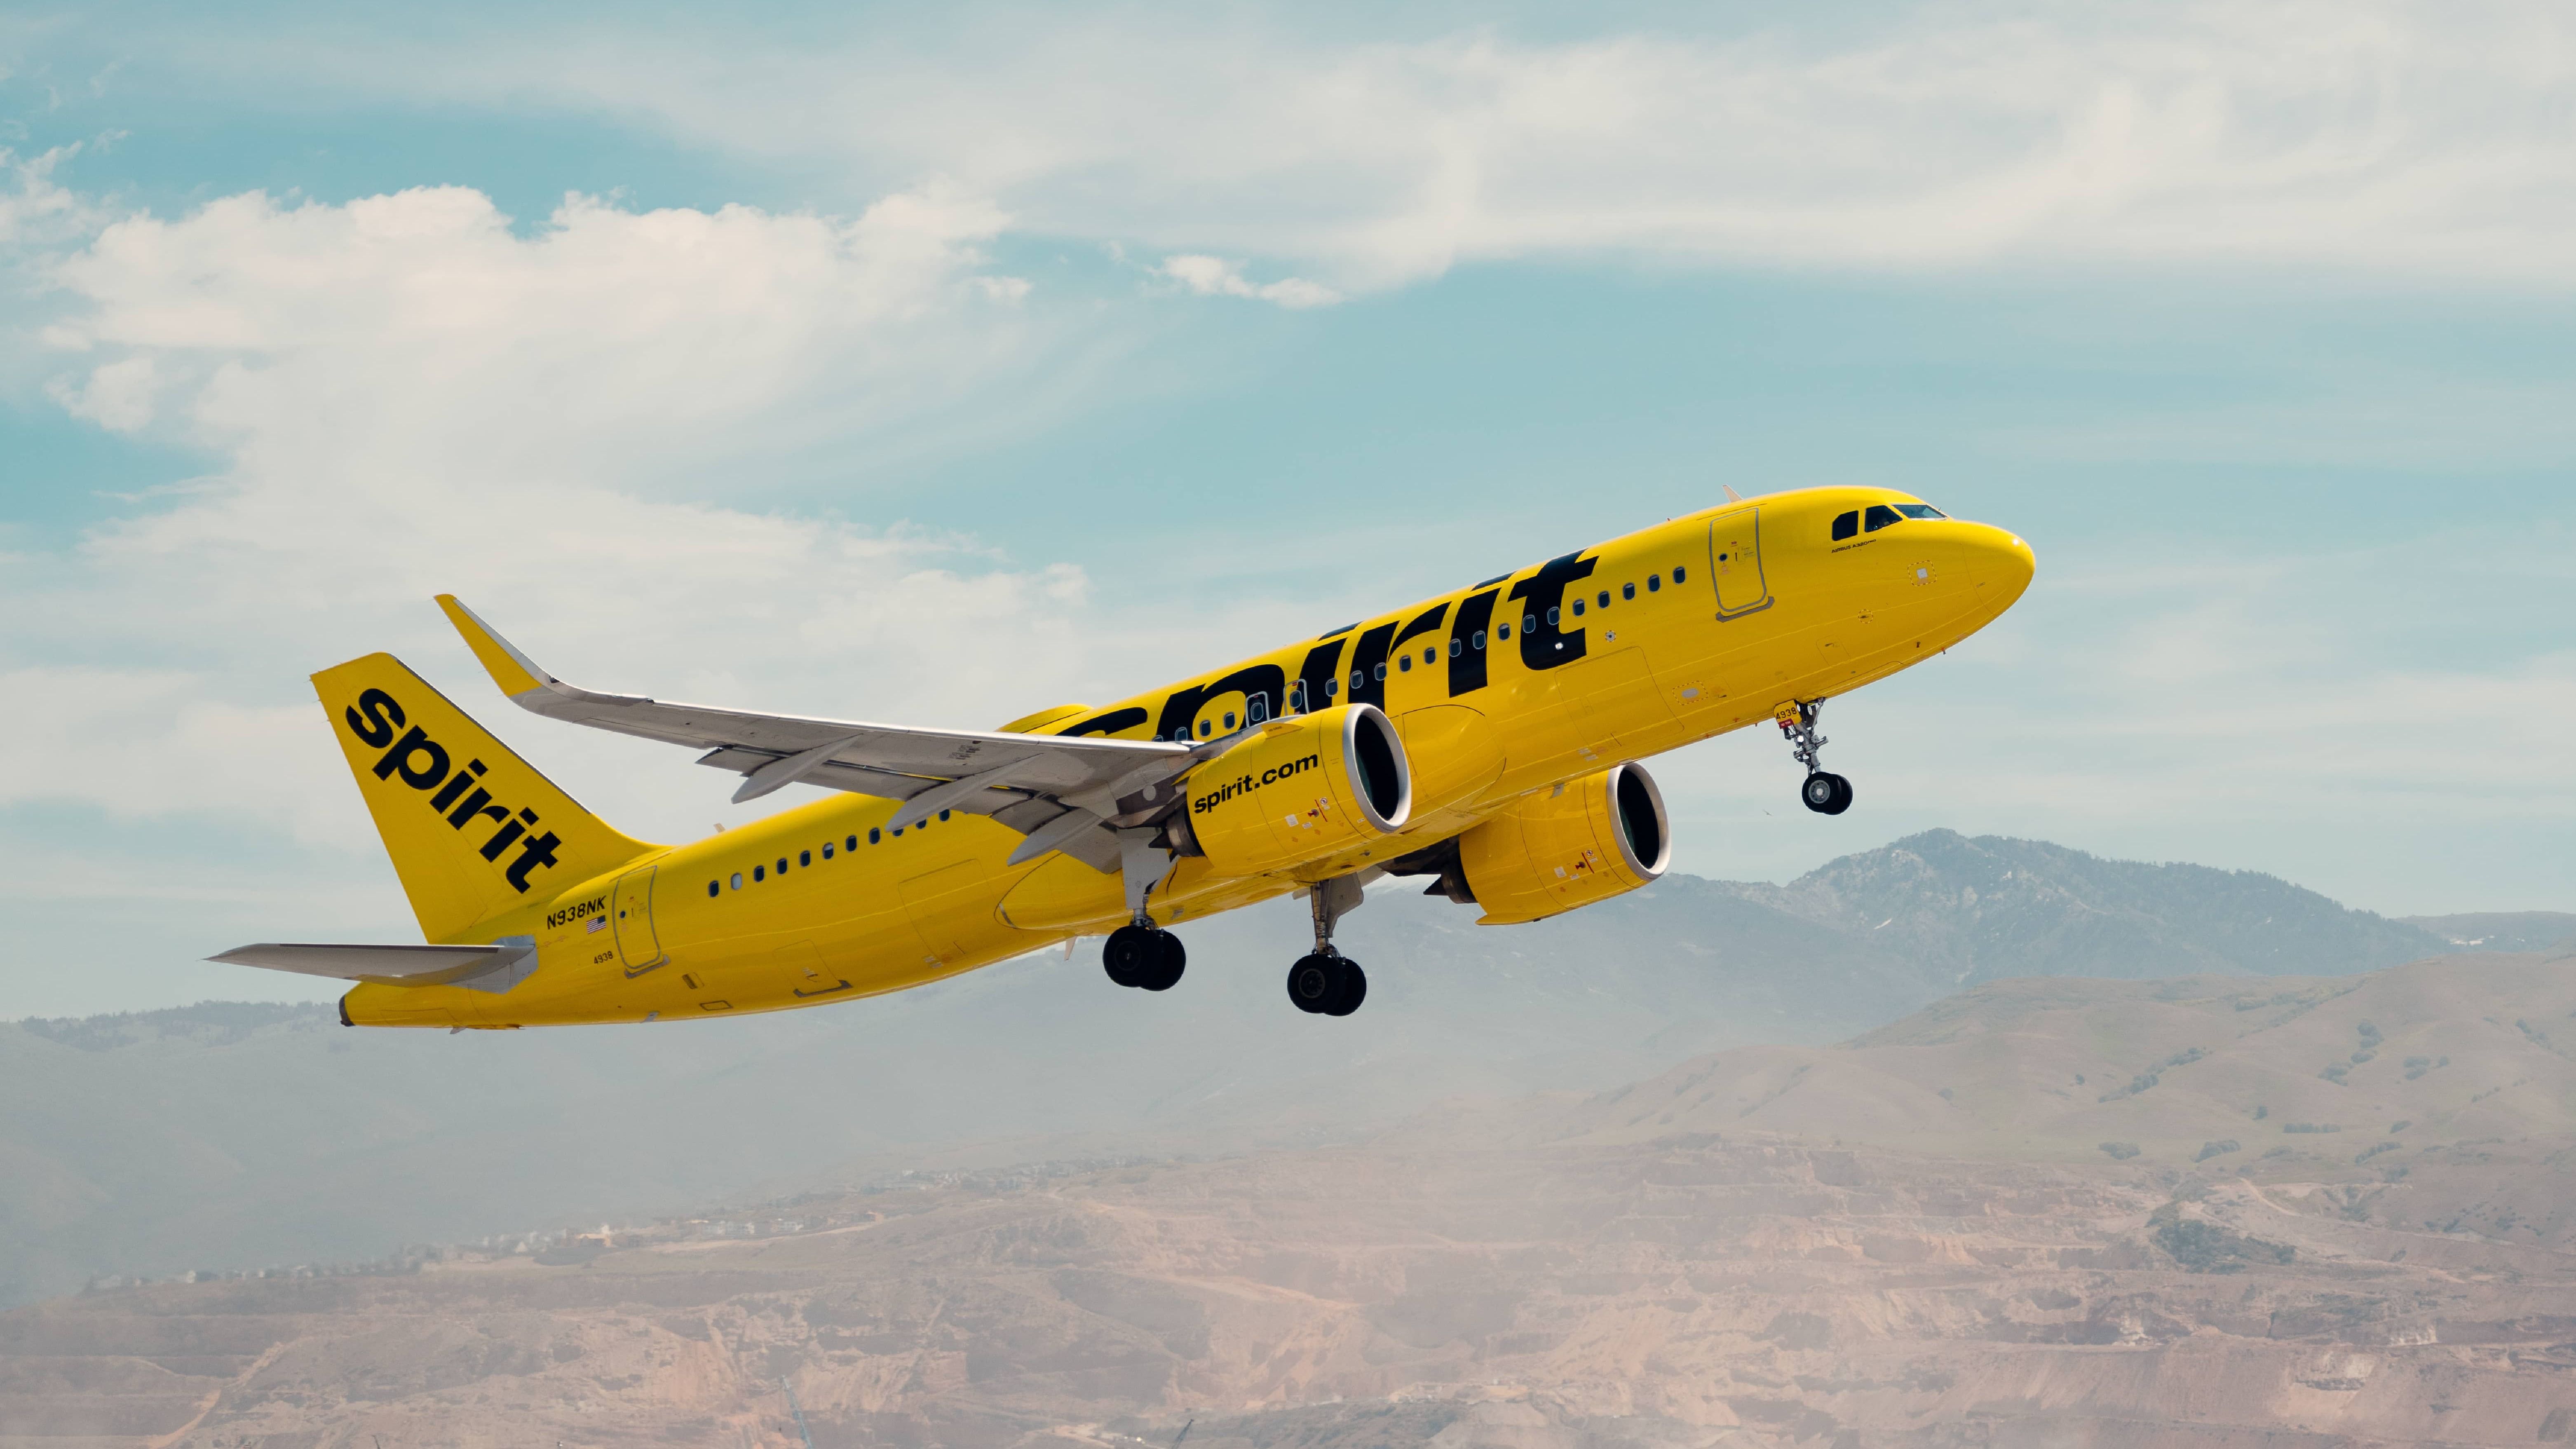 Spirit Airlines Airbus A320 family aircraft